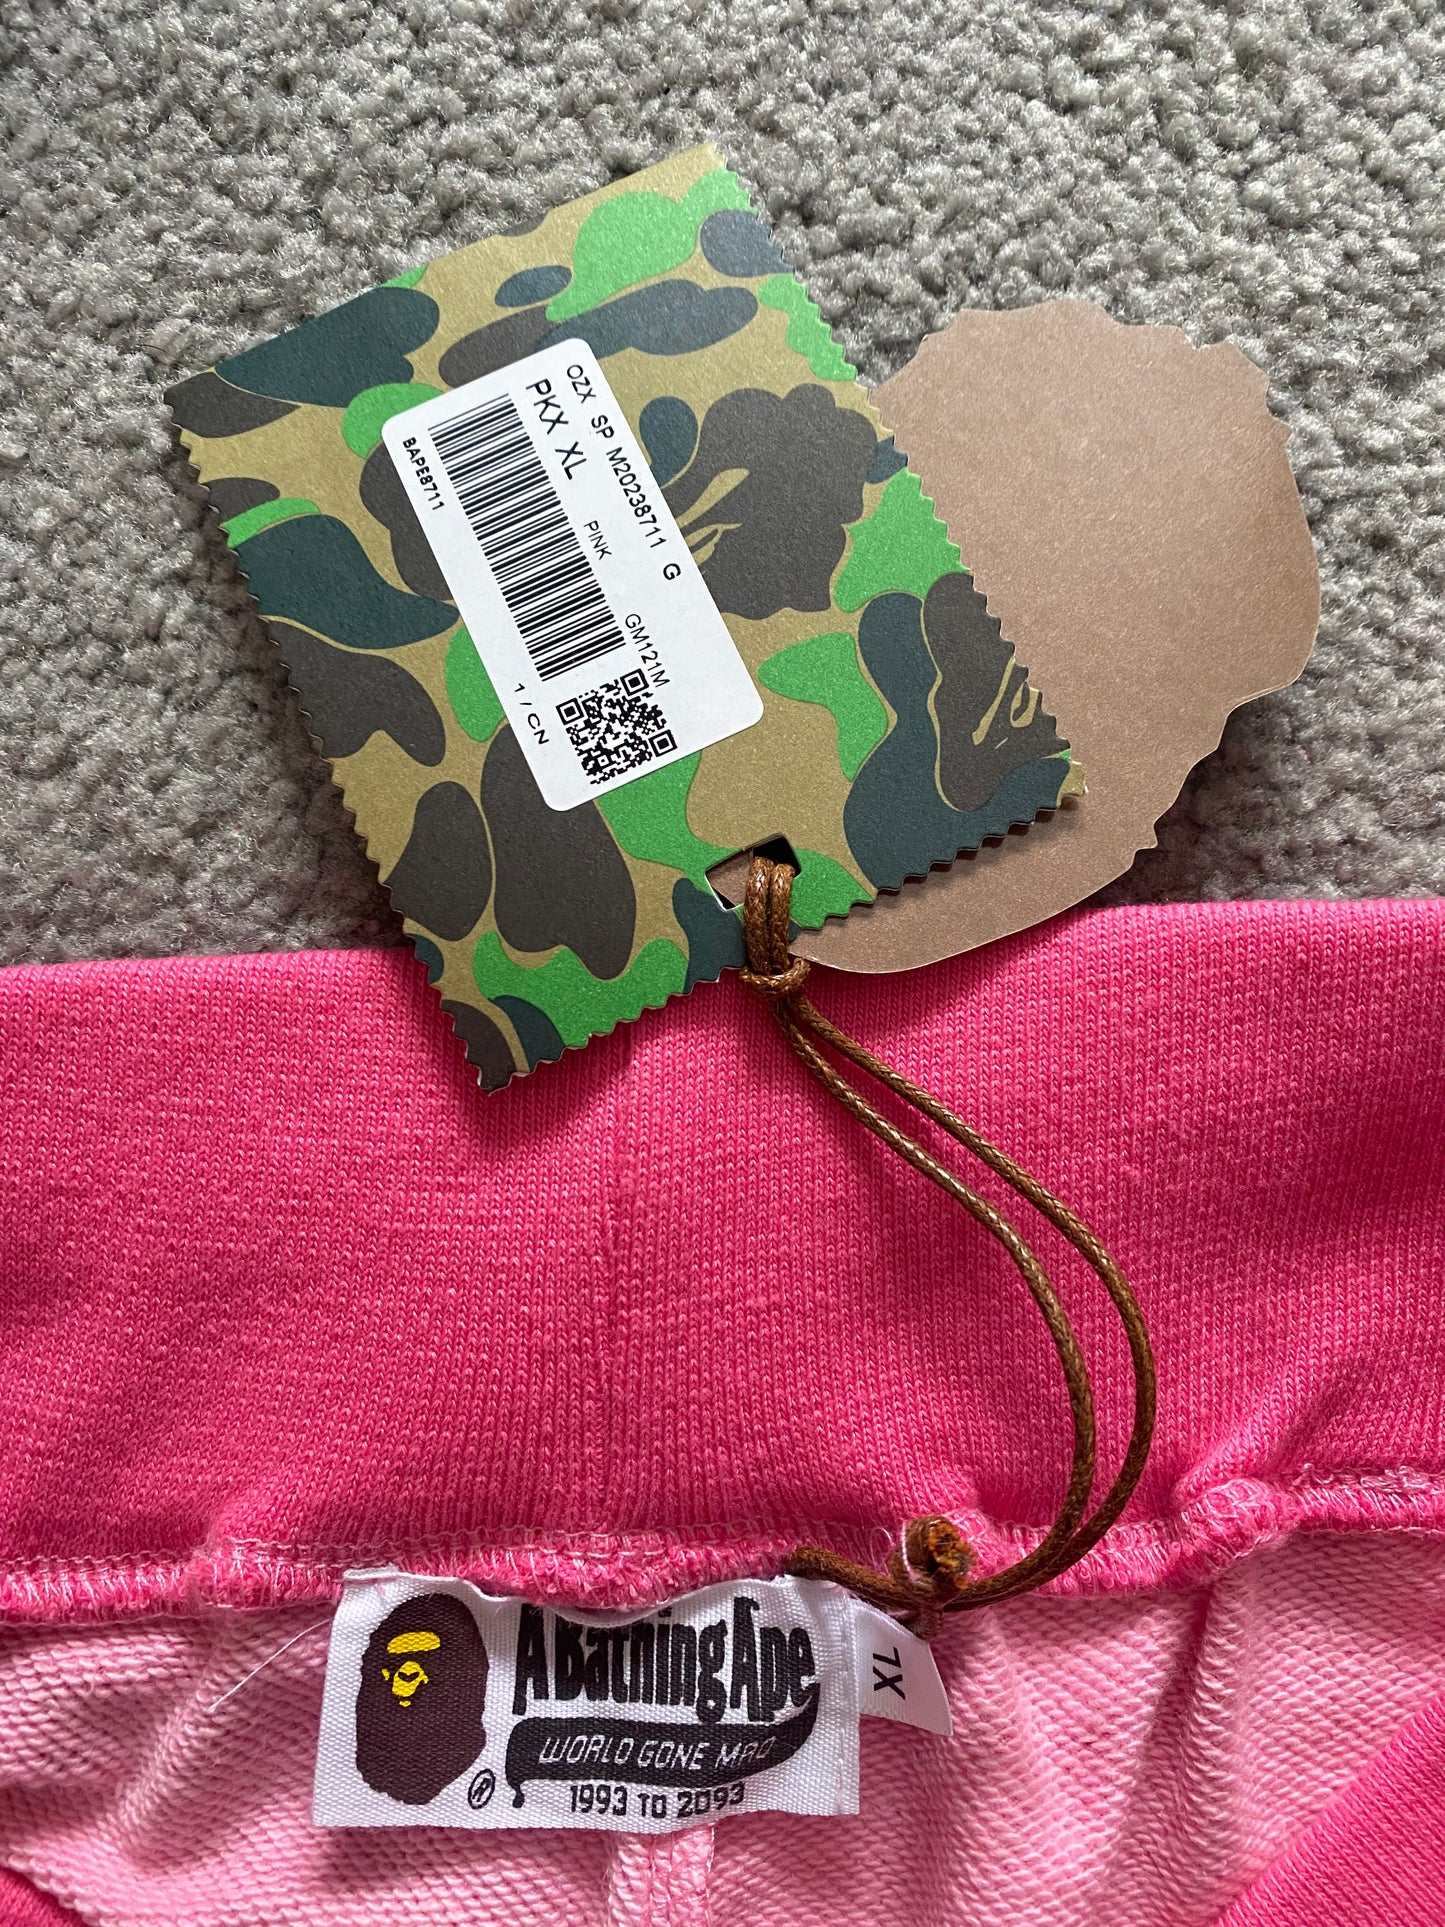 BAPE Pink Fire Camo Shorts - Icy Clothes Ro